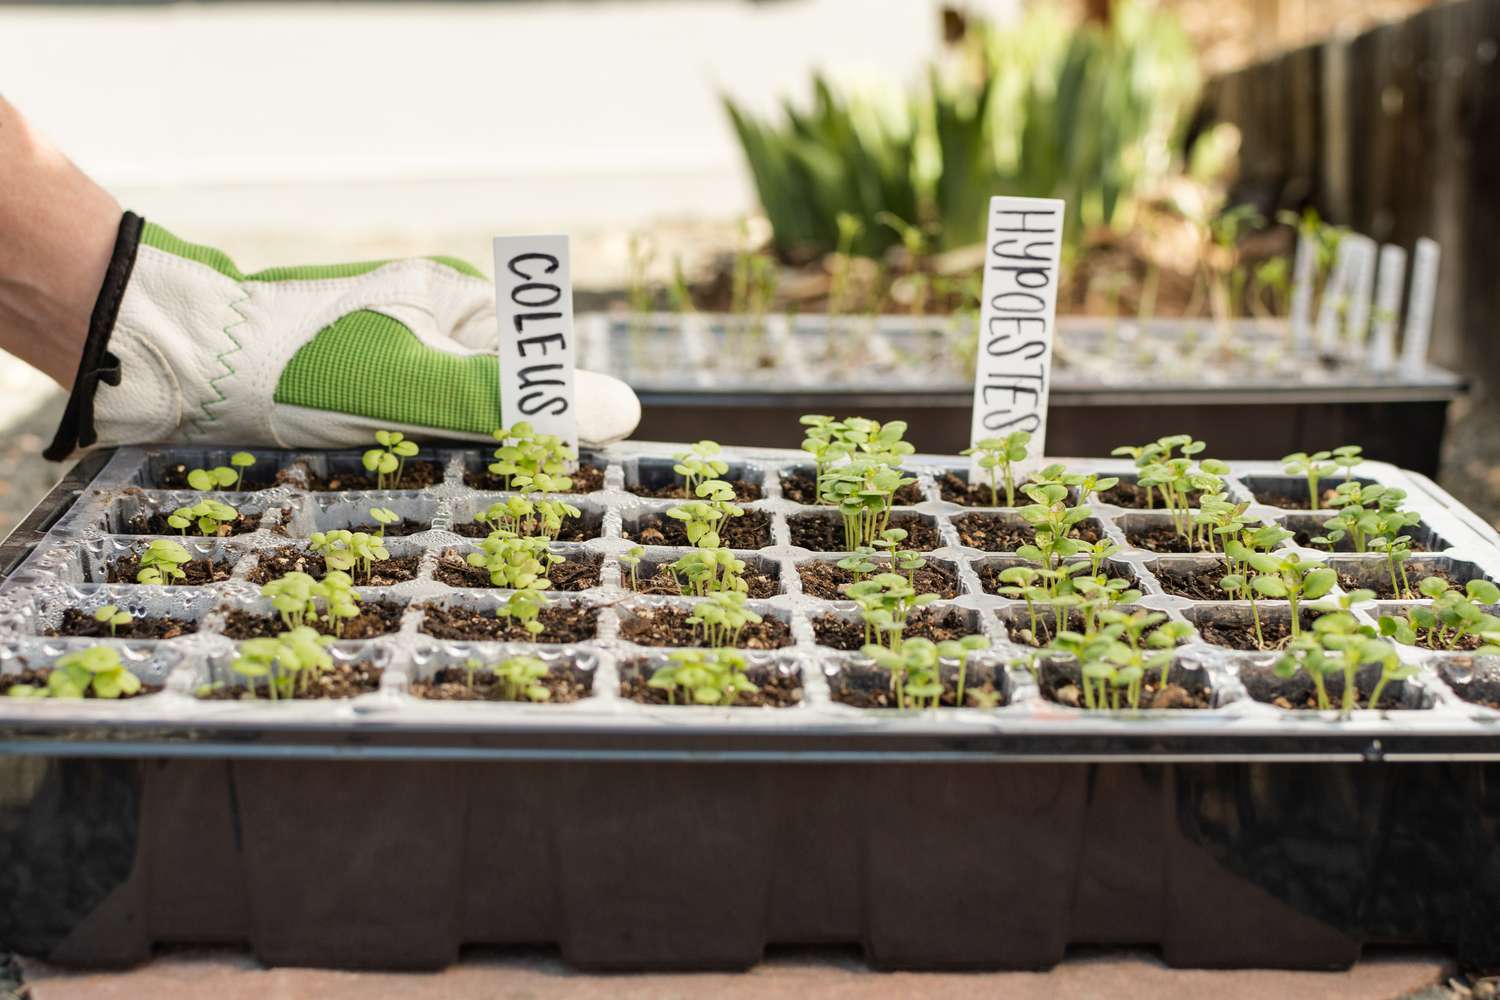 How Far Should Grow Lights Be From Seedlings